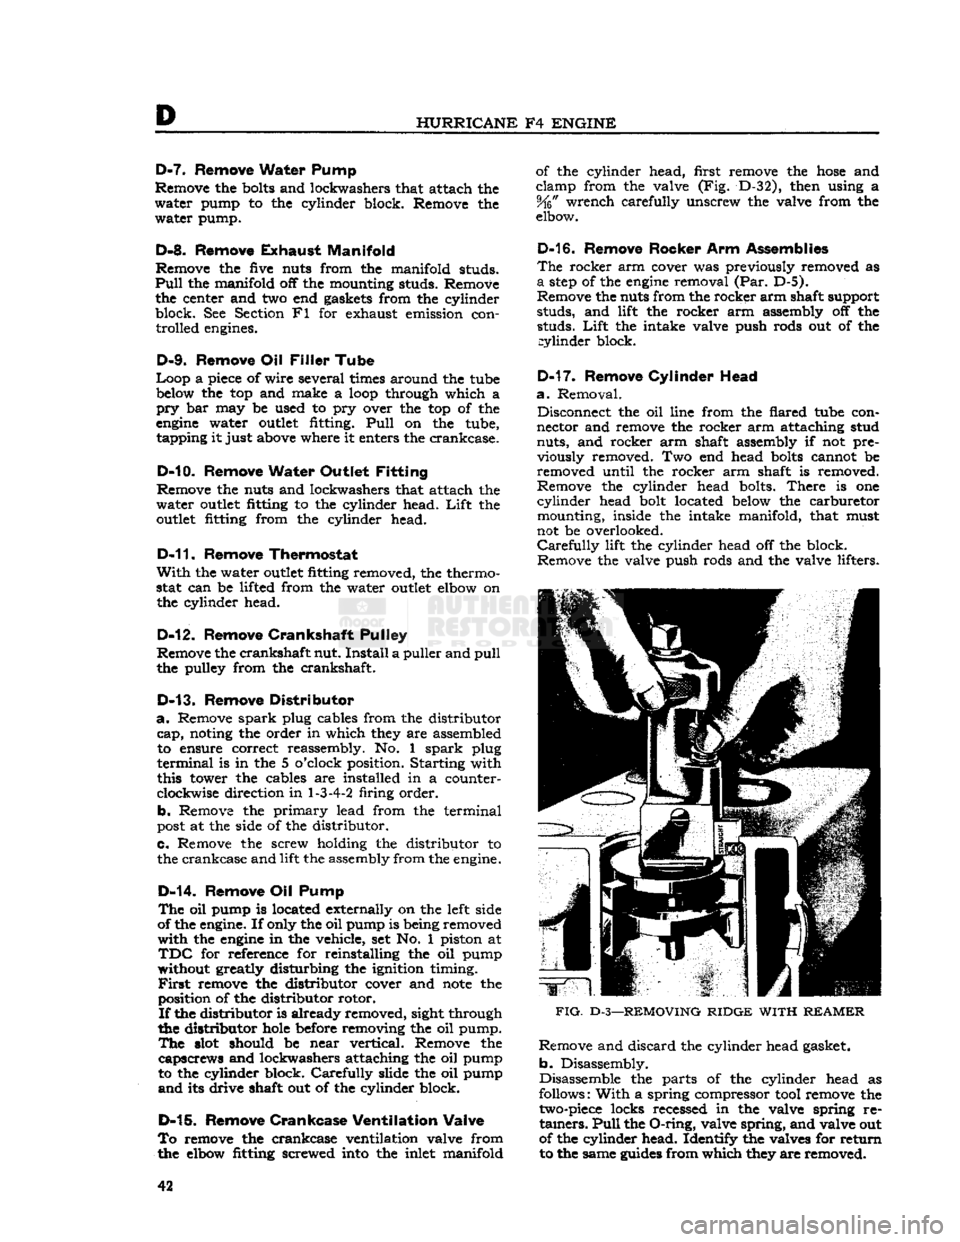 JEEP DJ 1953  Service Manual 
D 

HURRICANE
 F4
 ENGINE 
D-7.
 Remove Water Pump 
Remove the
 bolts
 and lockwashers that attach the 
water pump to the cylinder block. Remove the  water pump. 

D-8.
 Remove
 Exhaust
 Manifold 
Re